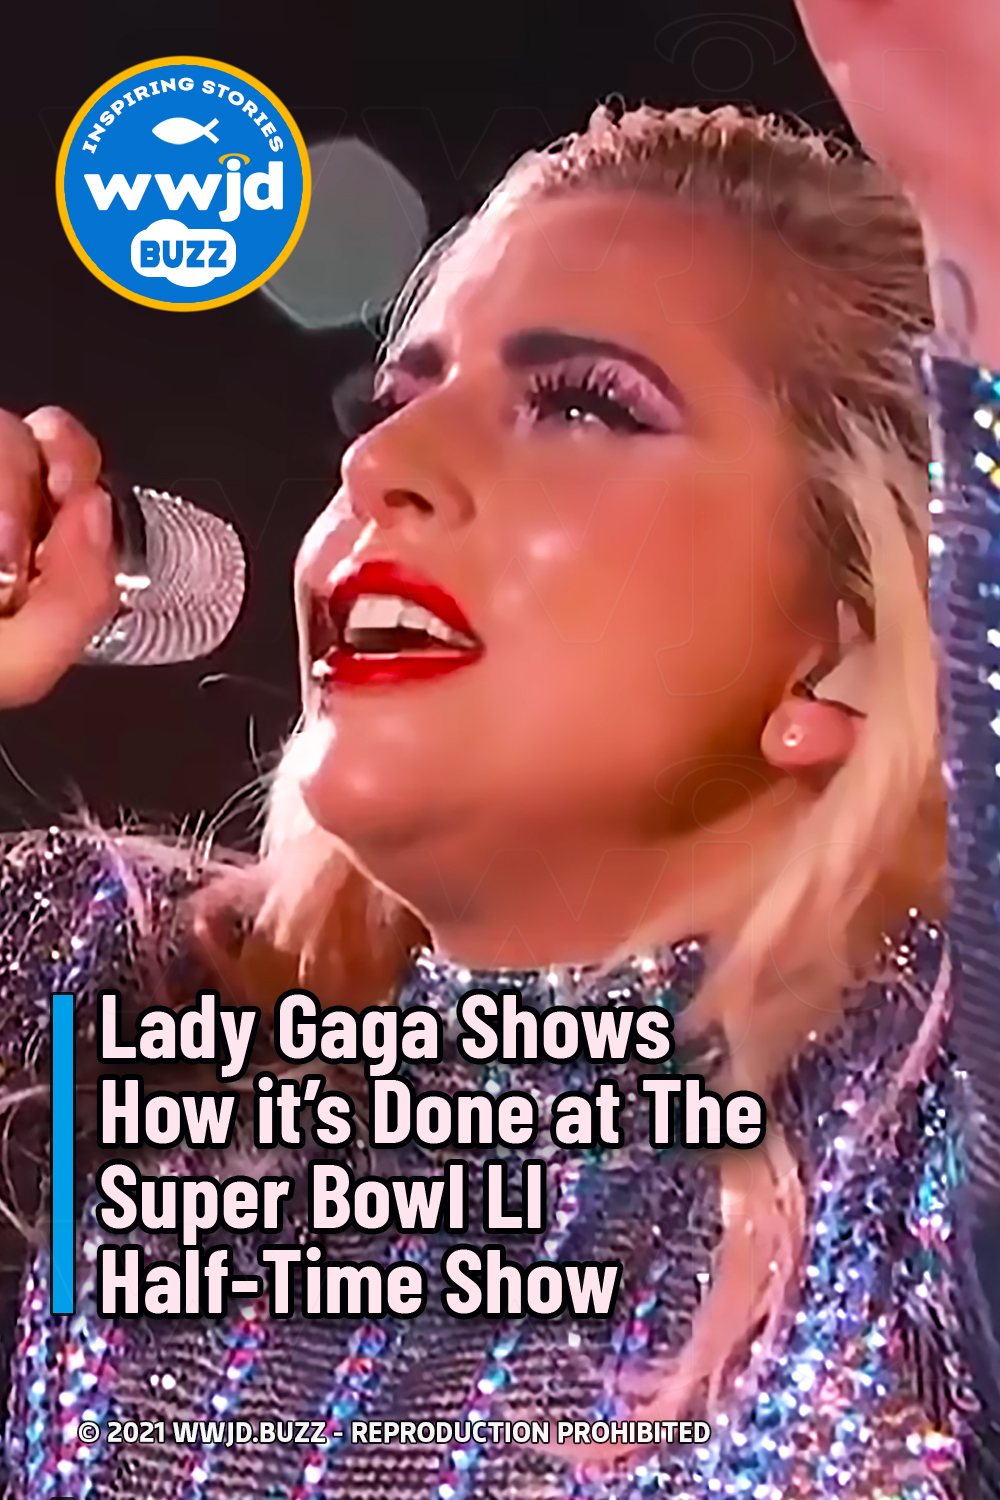 Lady Gaga Shows How it\'s Done at The Super Bowl LI Half-Time Show